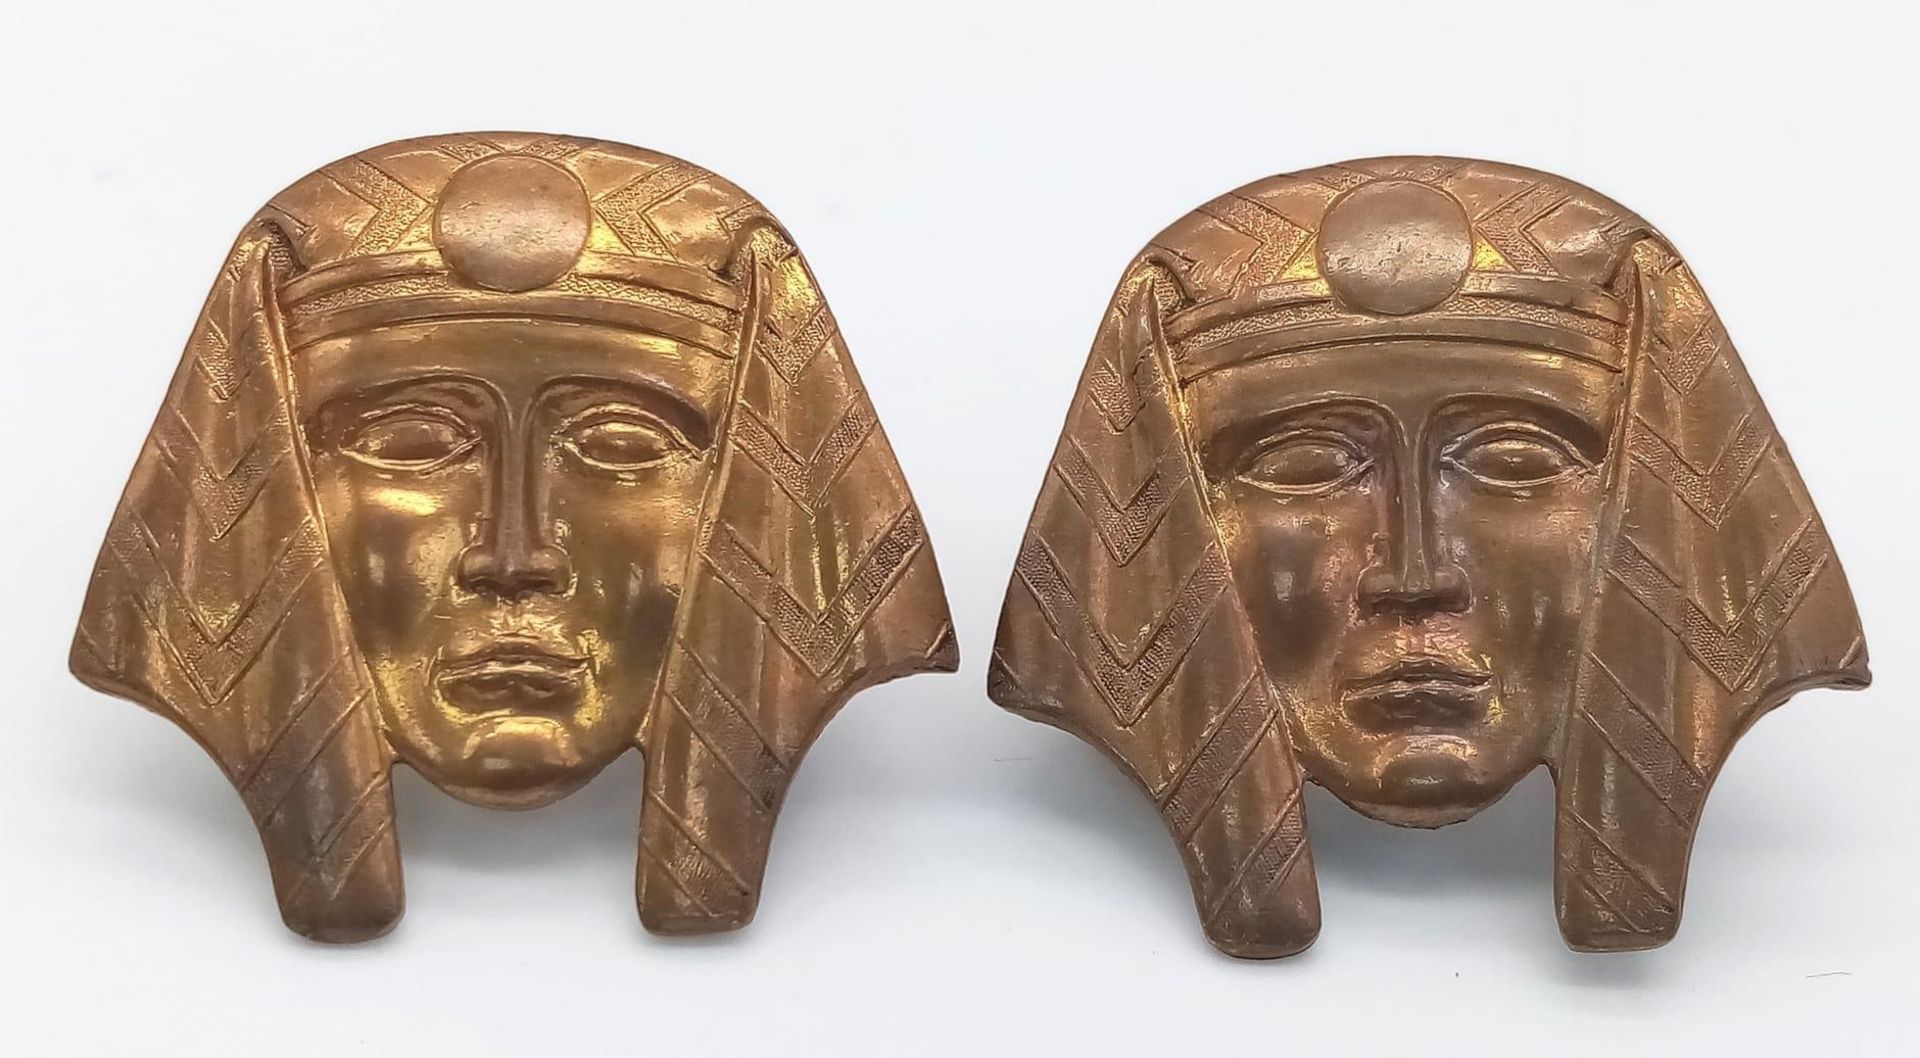 Rare Pair of WW1 Allied Interpreters Sphinx Collar Badges. Worn by Frenck, British, Canadian and